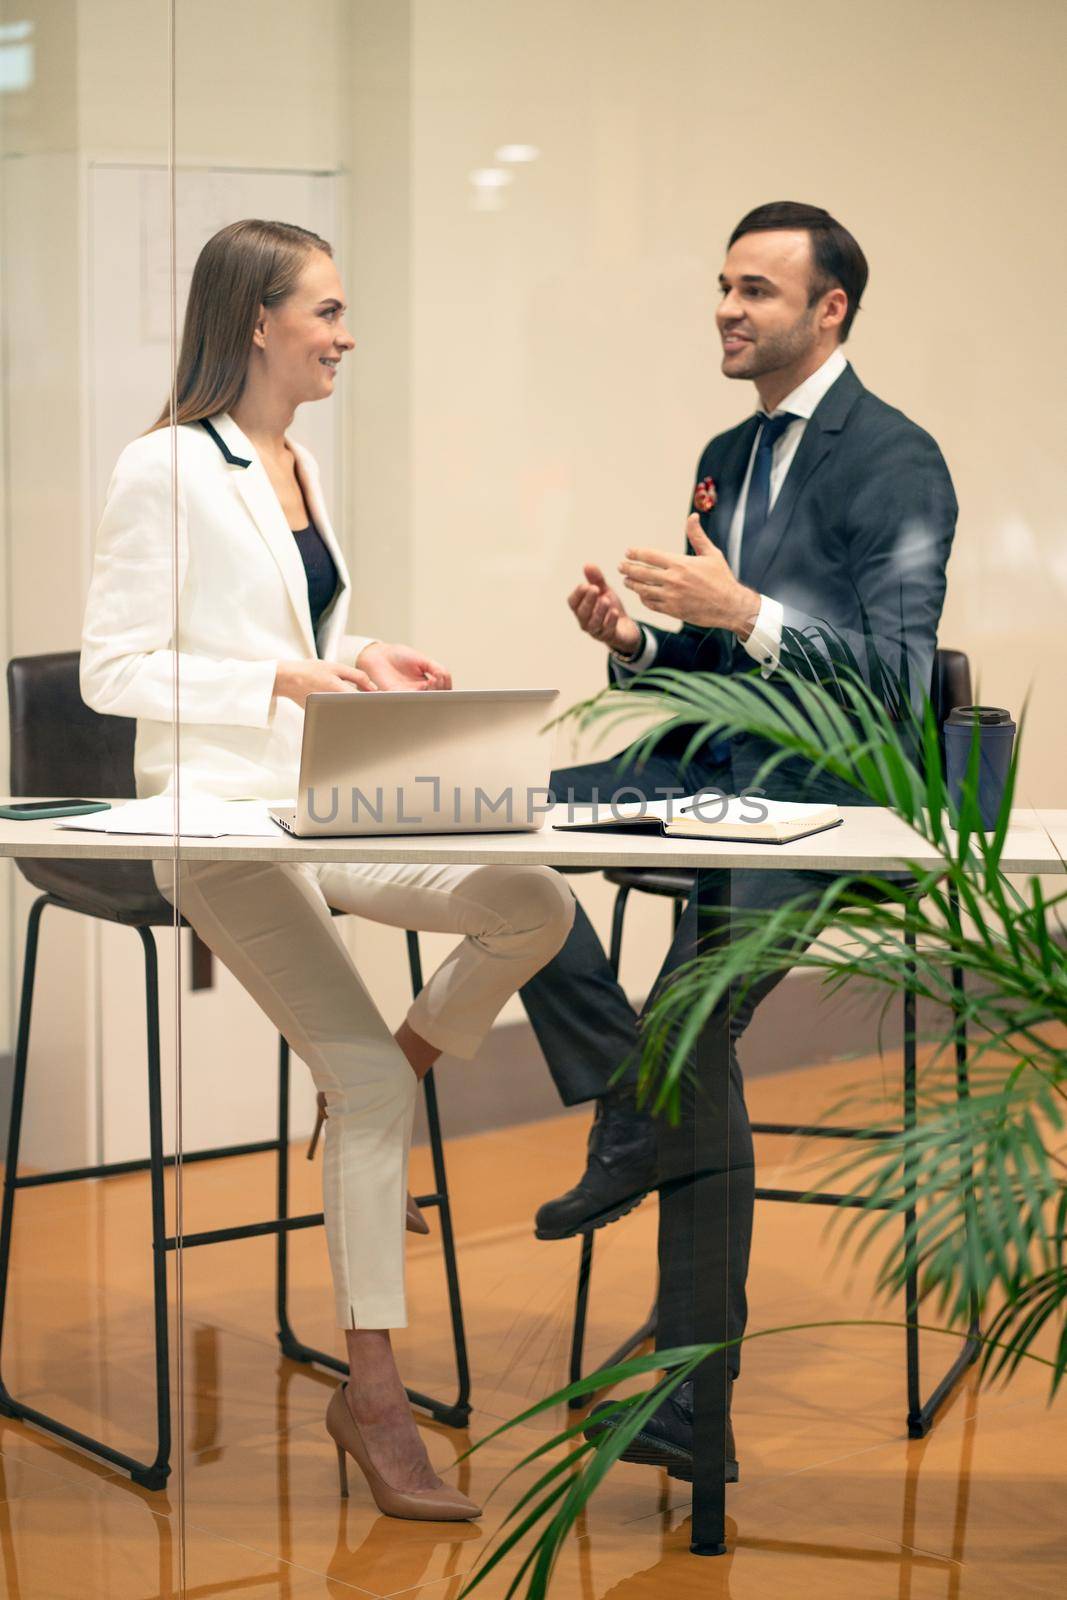 Business People, Female and Male are having a Nice Conversation at a Table in a Coworking Space. Working Relationship, Discussion, Decision Making, Presentation, Interview. View Through the Glass Wall. Face to face. Close-up. Full-length. High quality photo